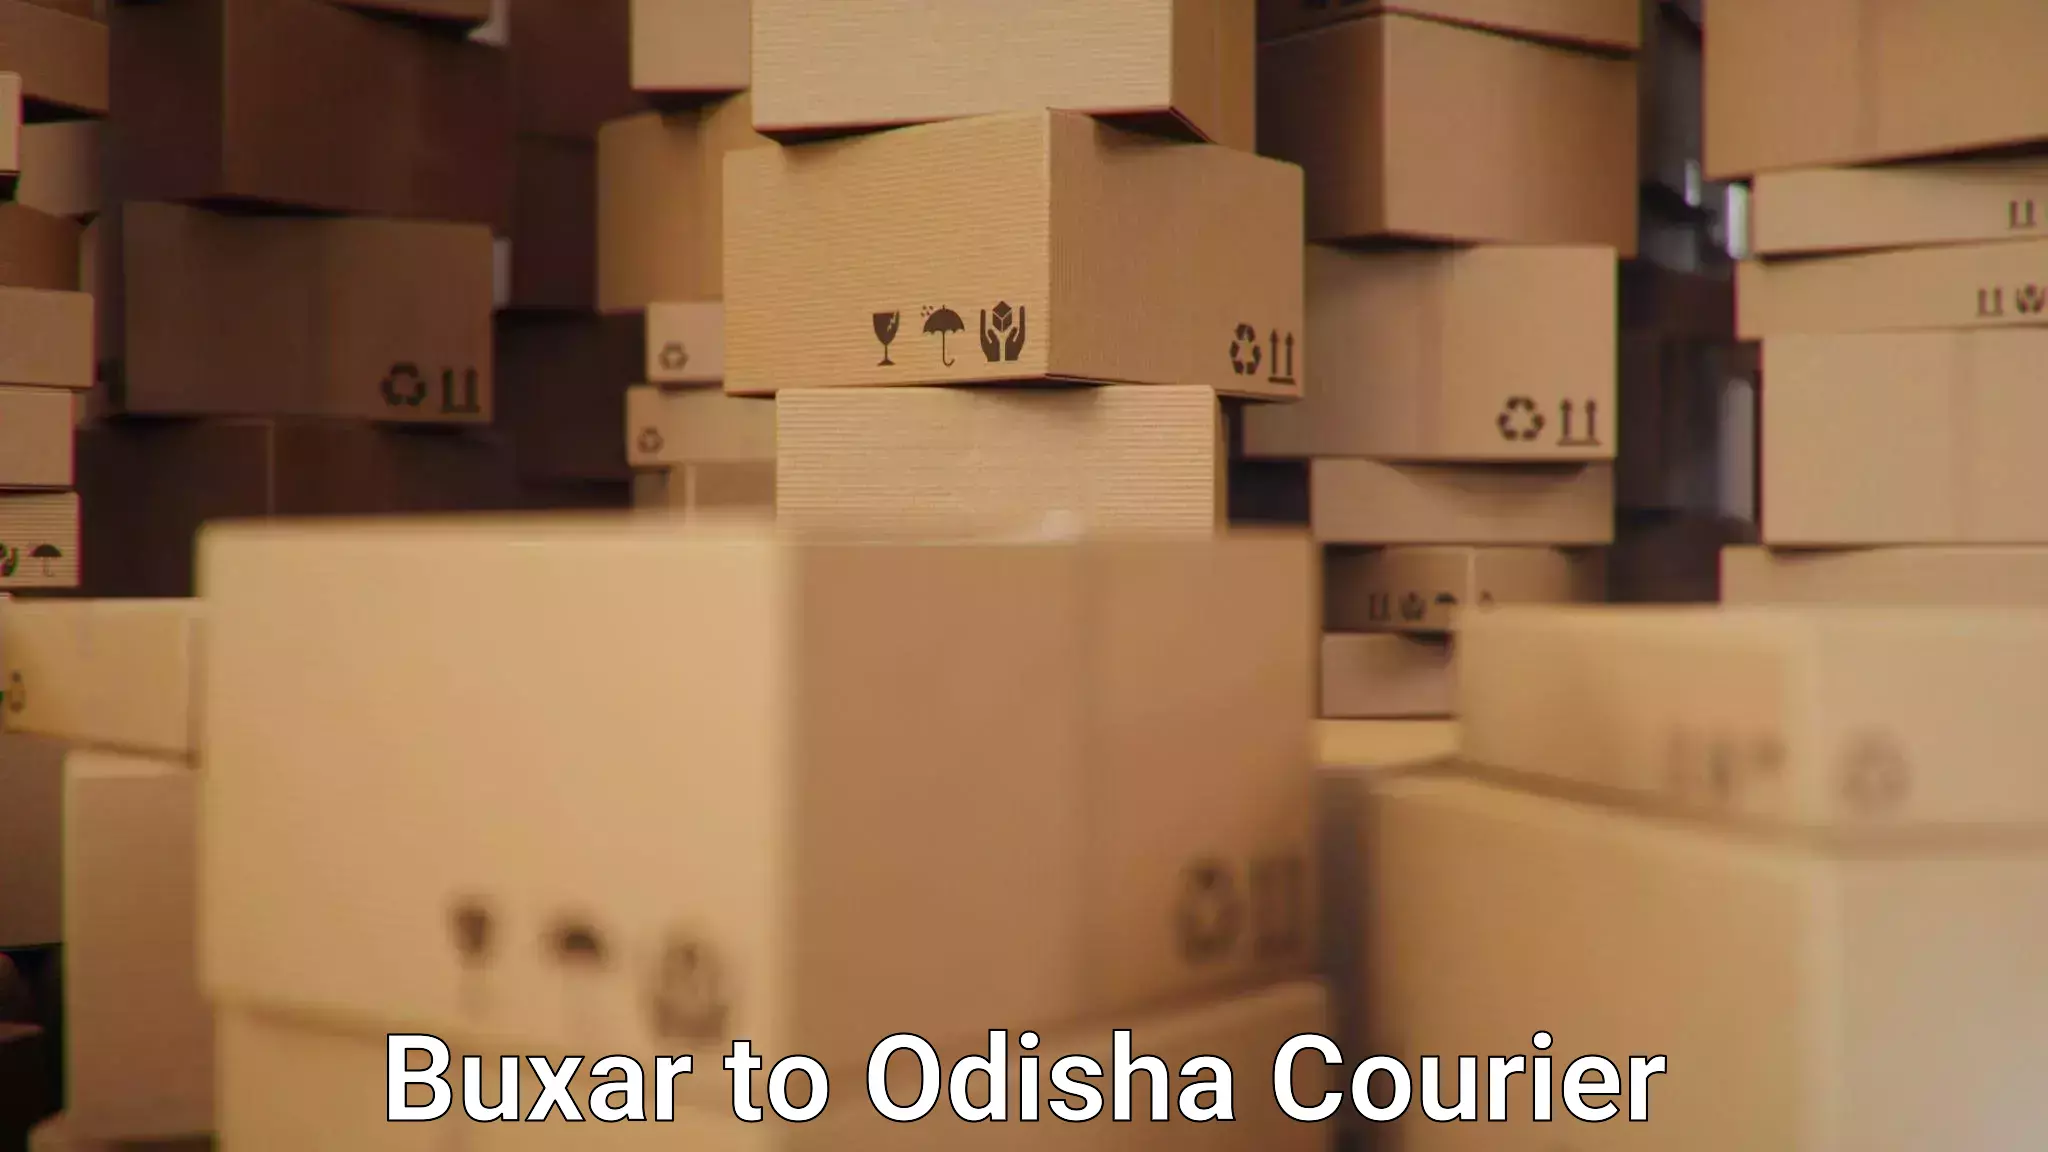 Full-service courier options Buxar to Rourkela